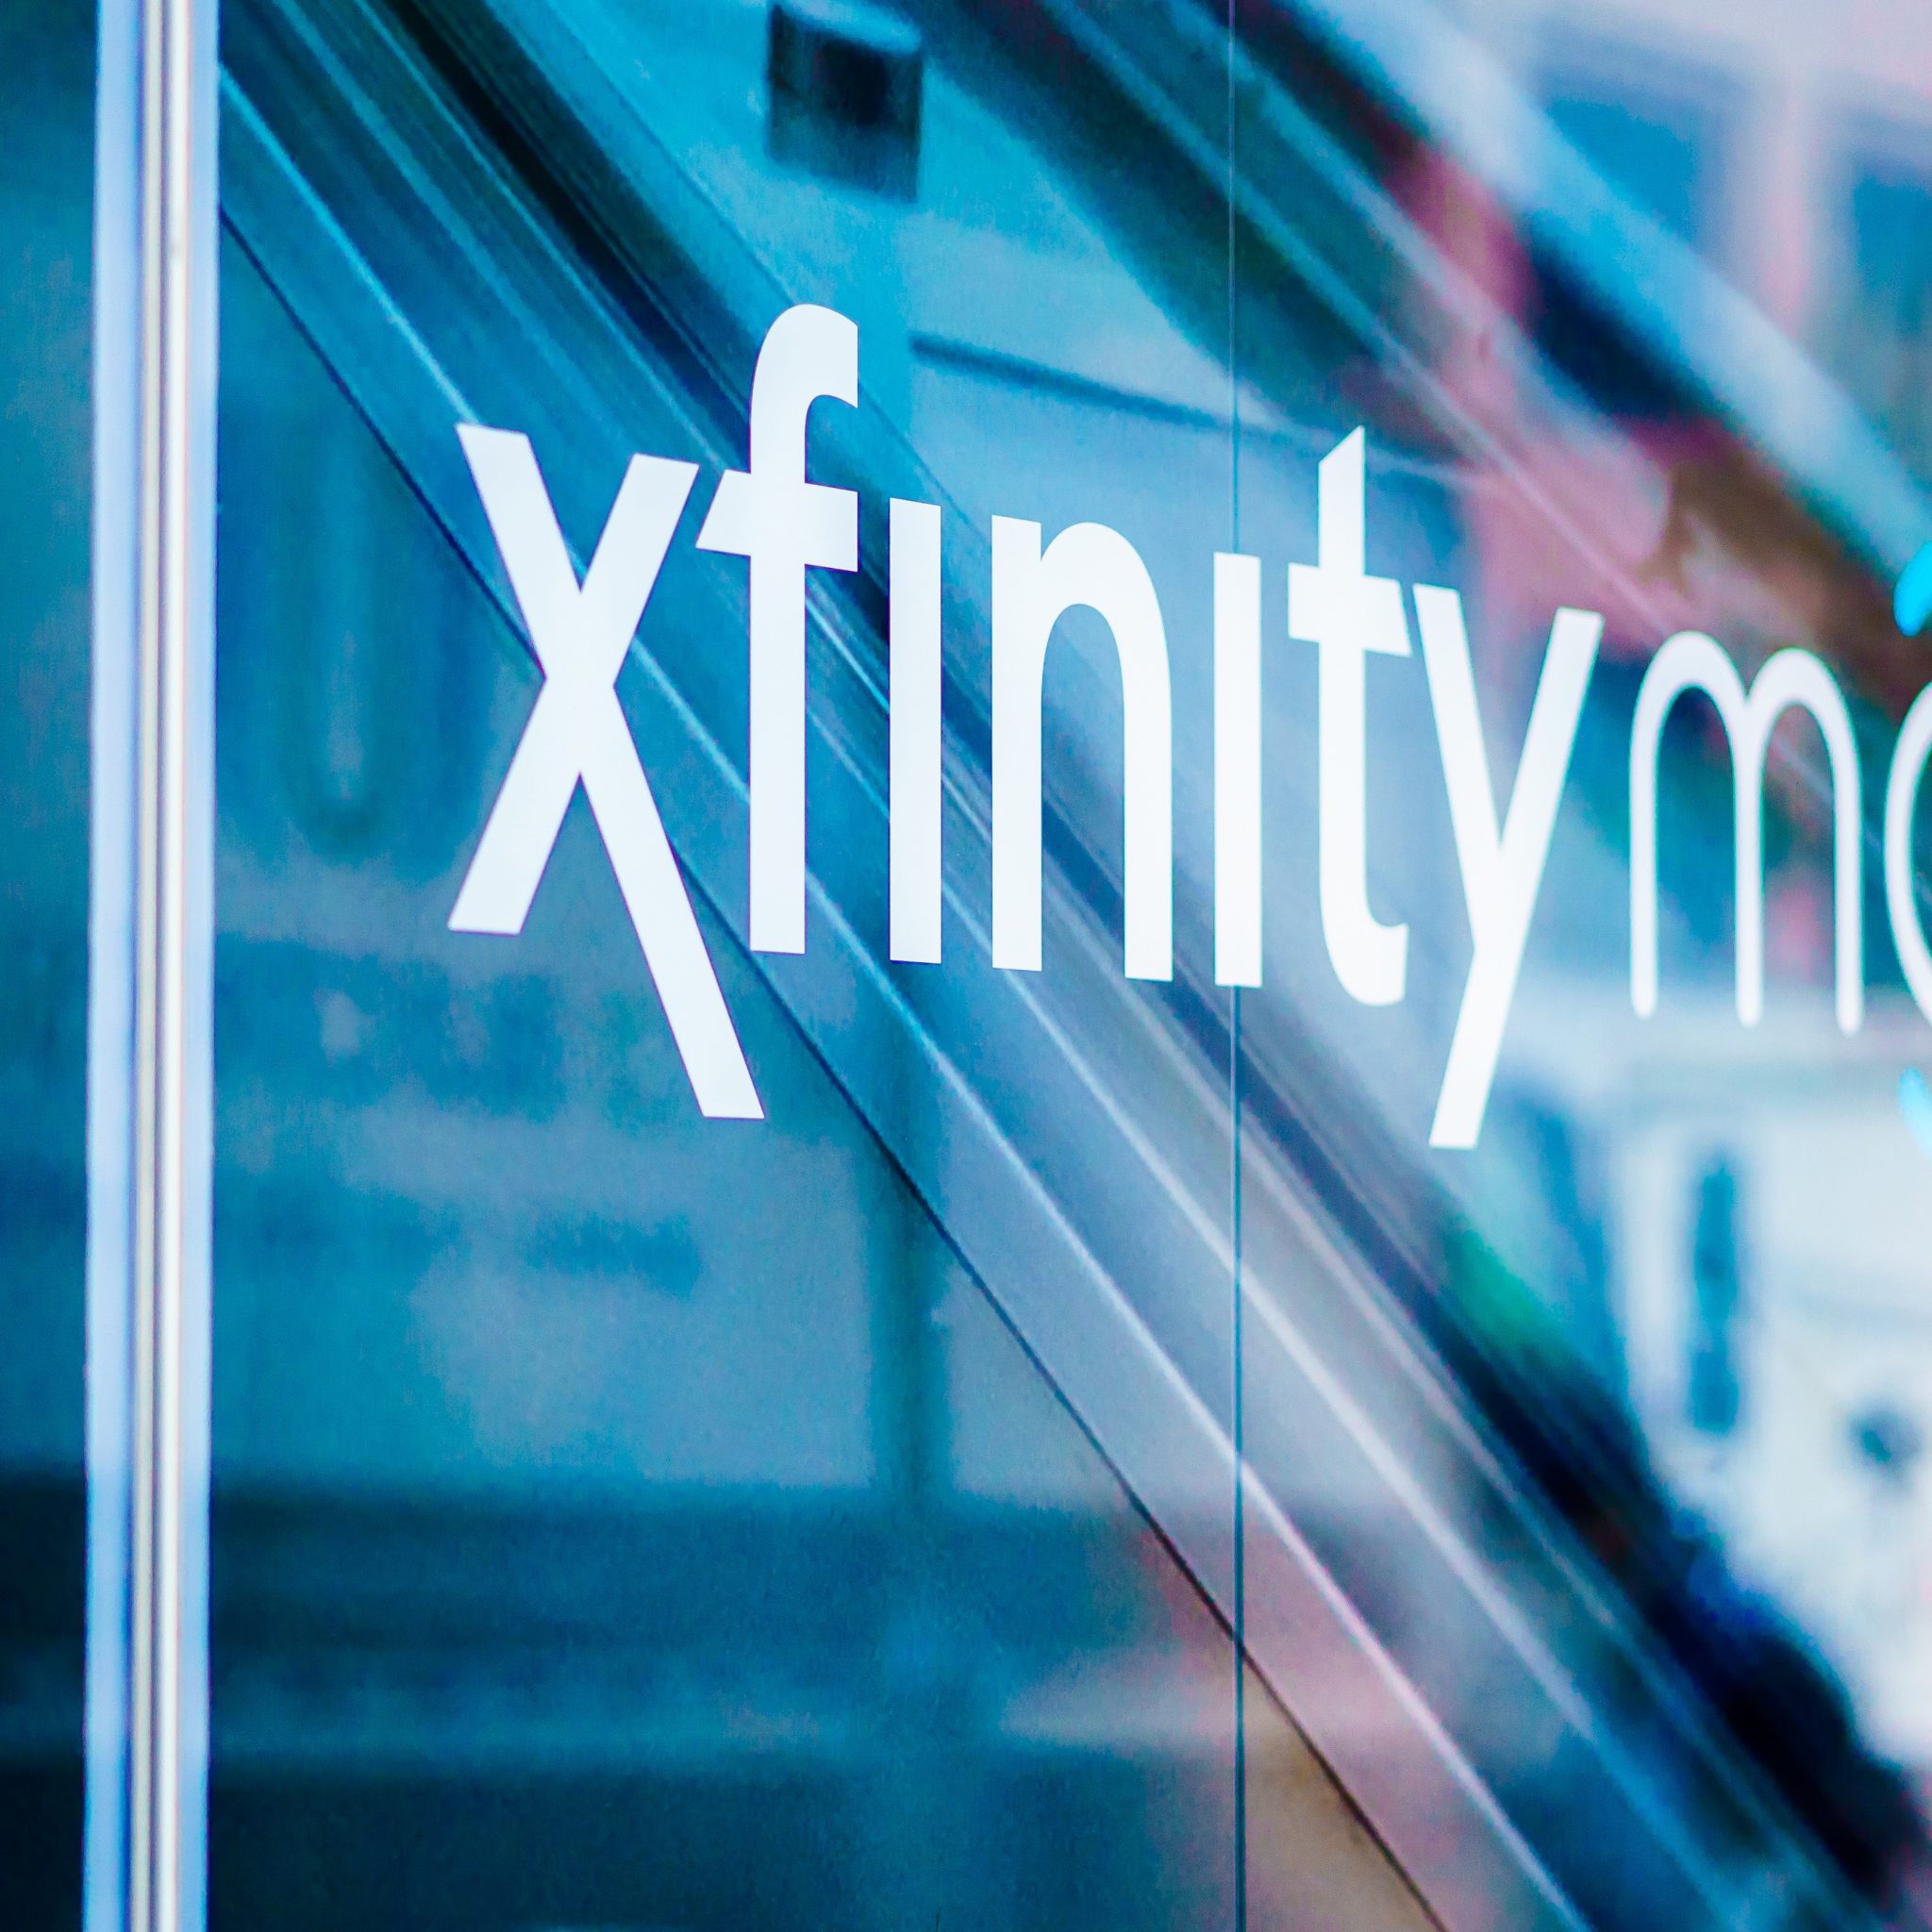 Kagan Comcast Xfinity Mobile lowprice plan, but there's a catch